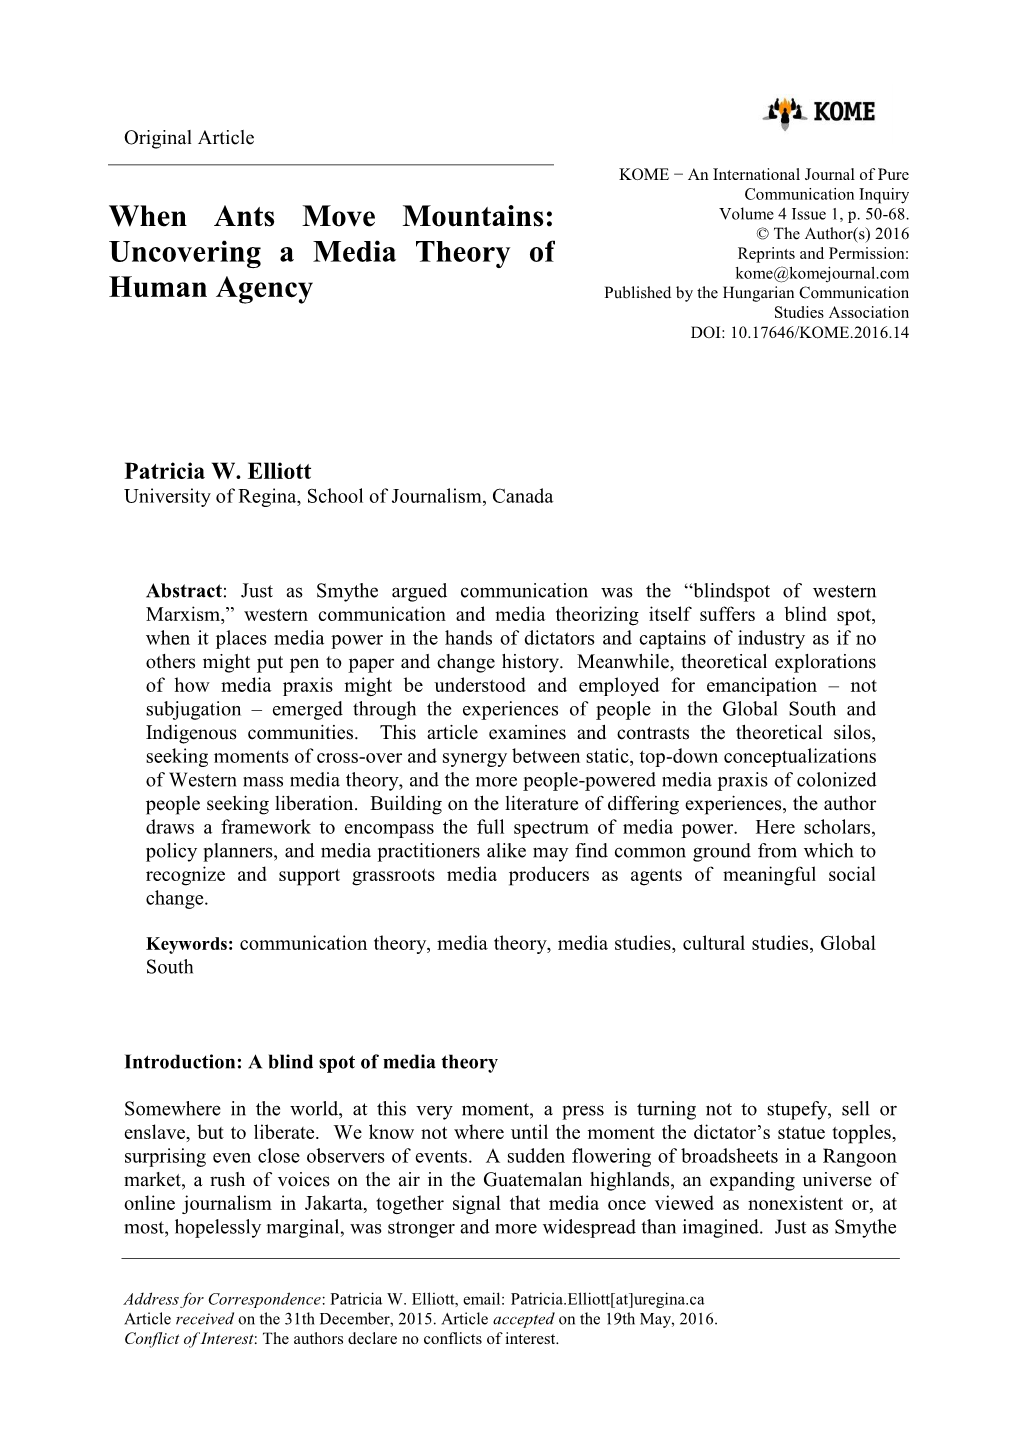 When Ants Move Mountains: Uncovering a Media Theory Of